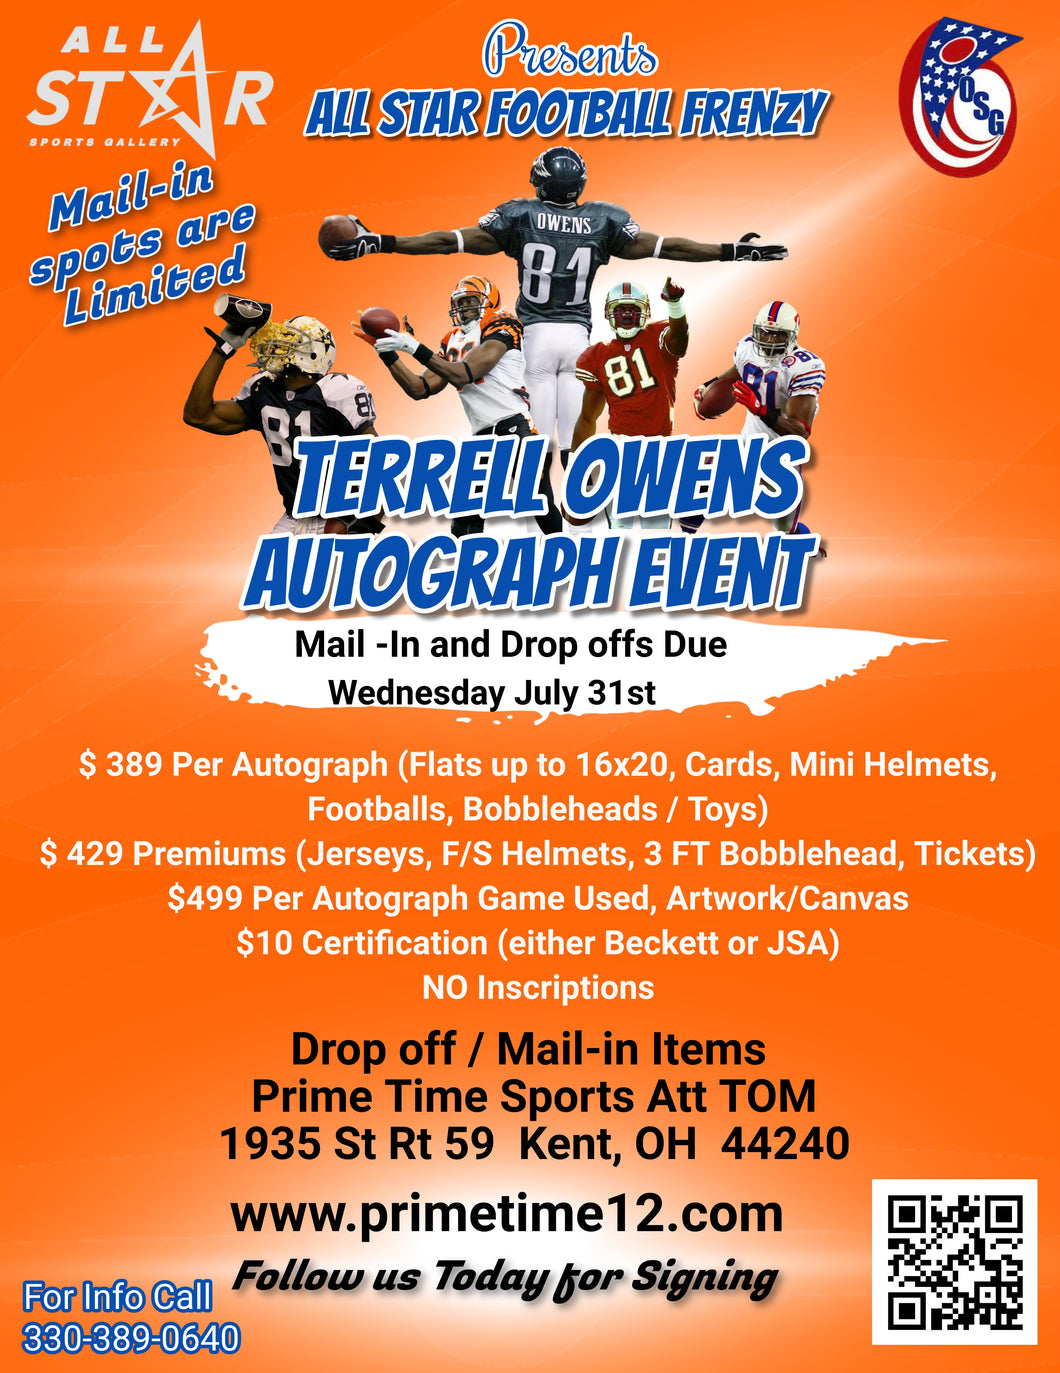 MAIL-IN OR DROP OFF Terrell Owens Pre-Sale ticket for autograph signing on Game-Used Item, Artwork, or Canvas